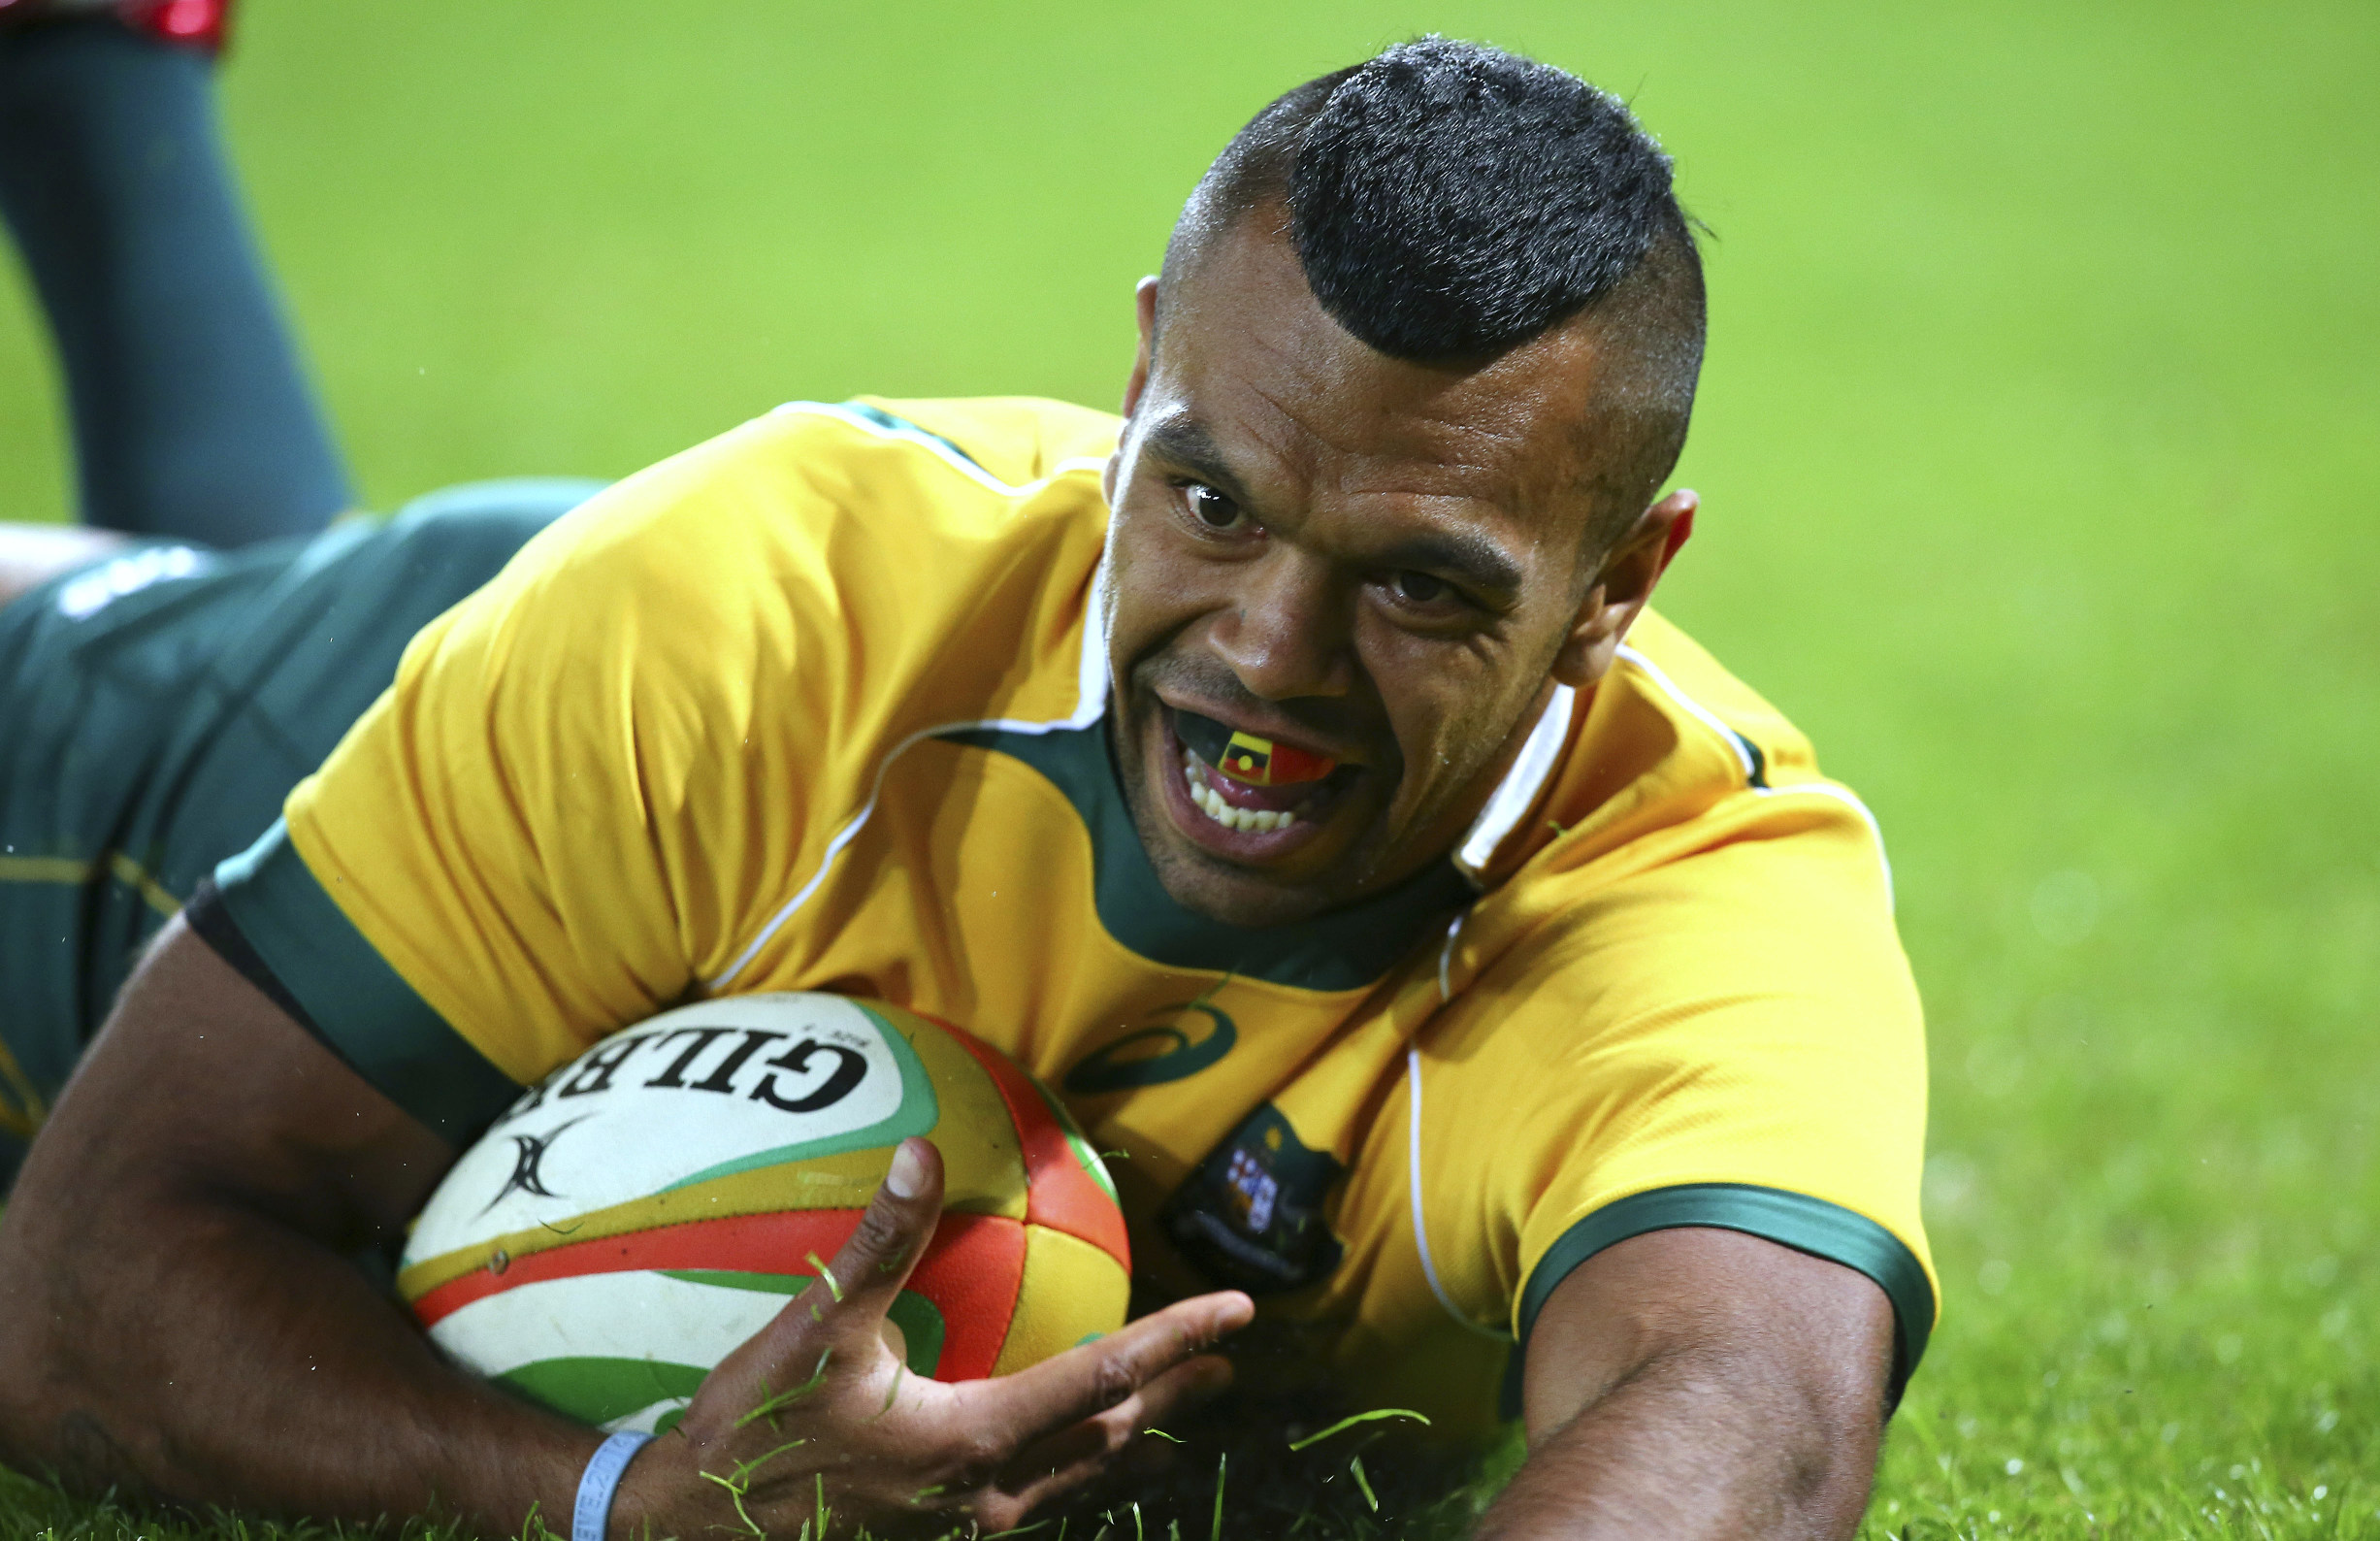 Kurtley Beale's 47-test career has been dogged by off-field  problems and last year the 25-year-old was forced to undergo counselling and rehabilitation for his struggles with alcohol. Photo: AP